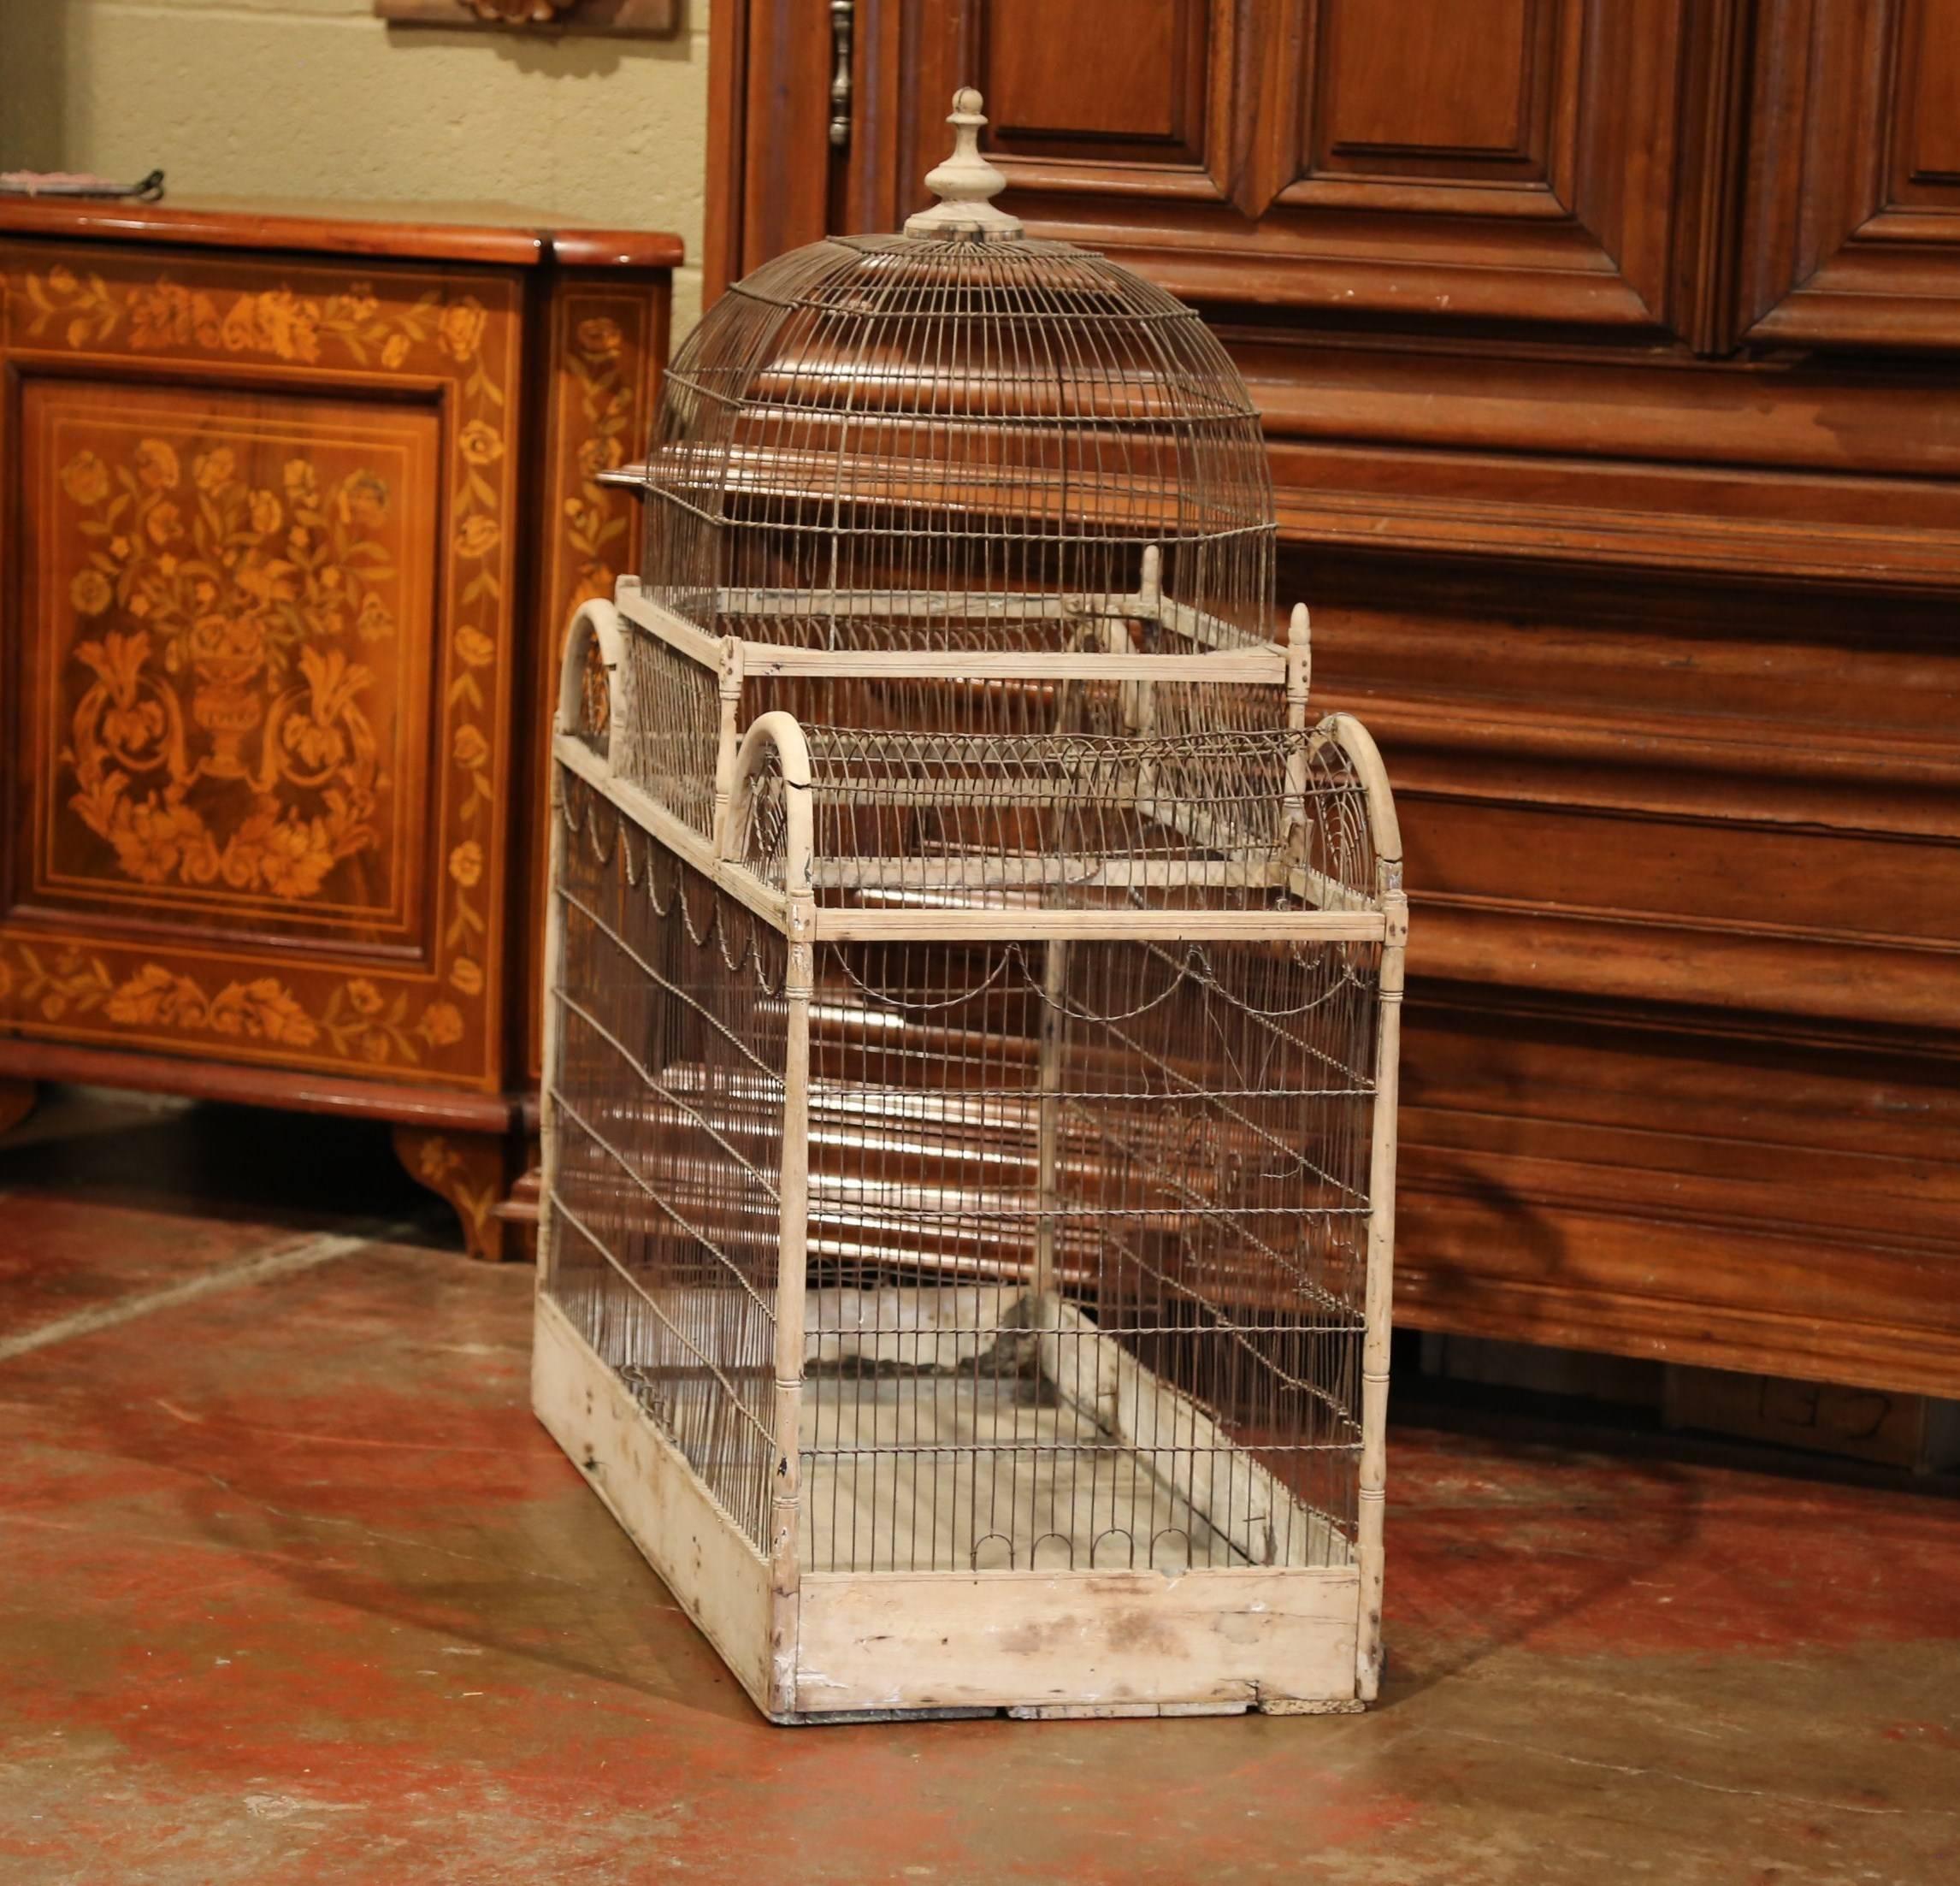 Bring the outdoors in with this large, elegant, antique birdcage. Crafted in France, circa 1860, this hand painted cage features a rounded dome top with a decorative finial, two demilune arches on each side and a larger rectangular birdhouse